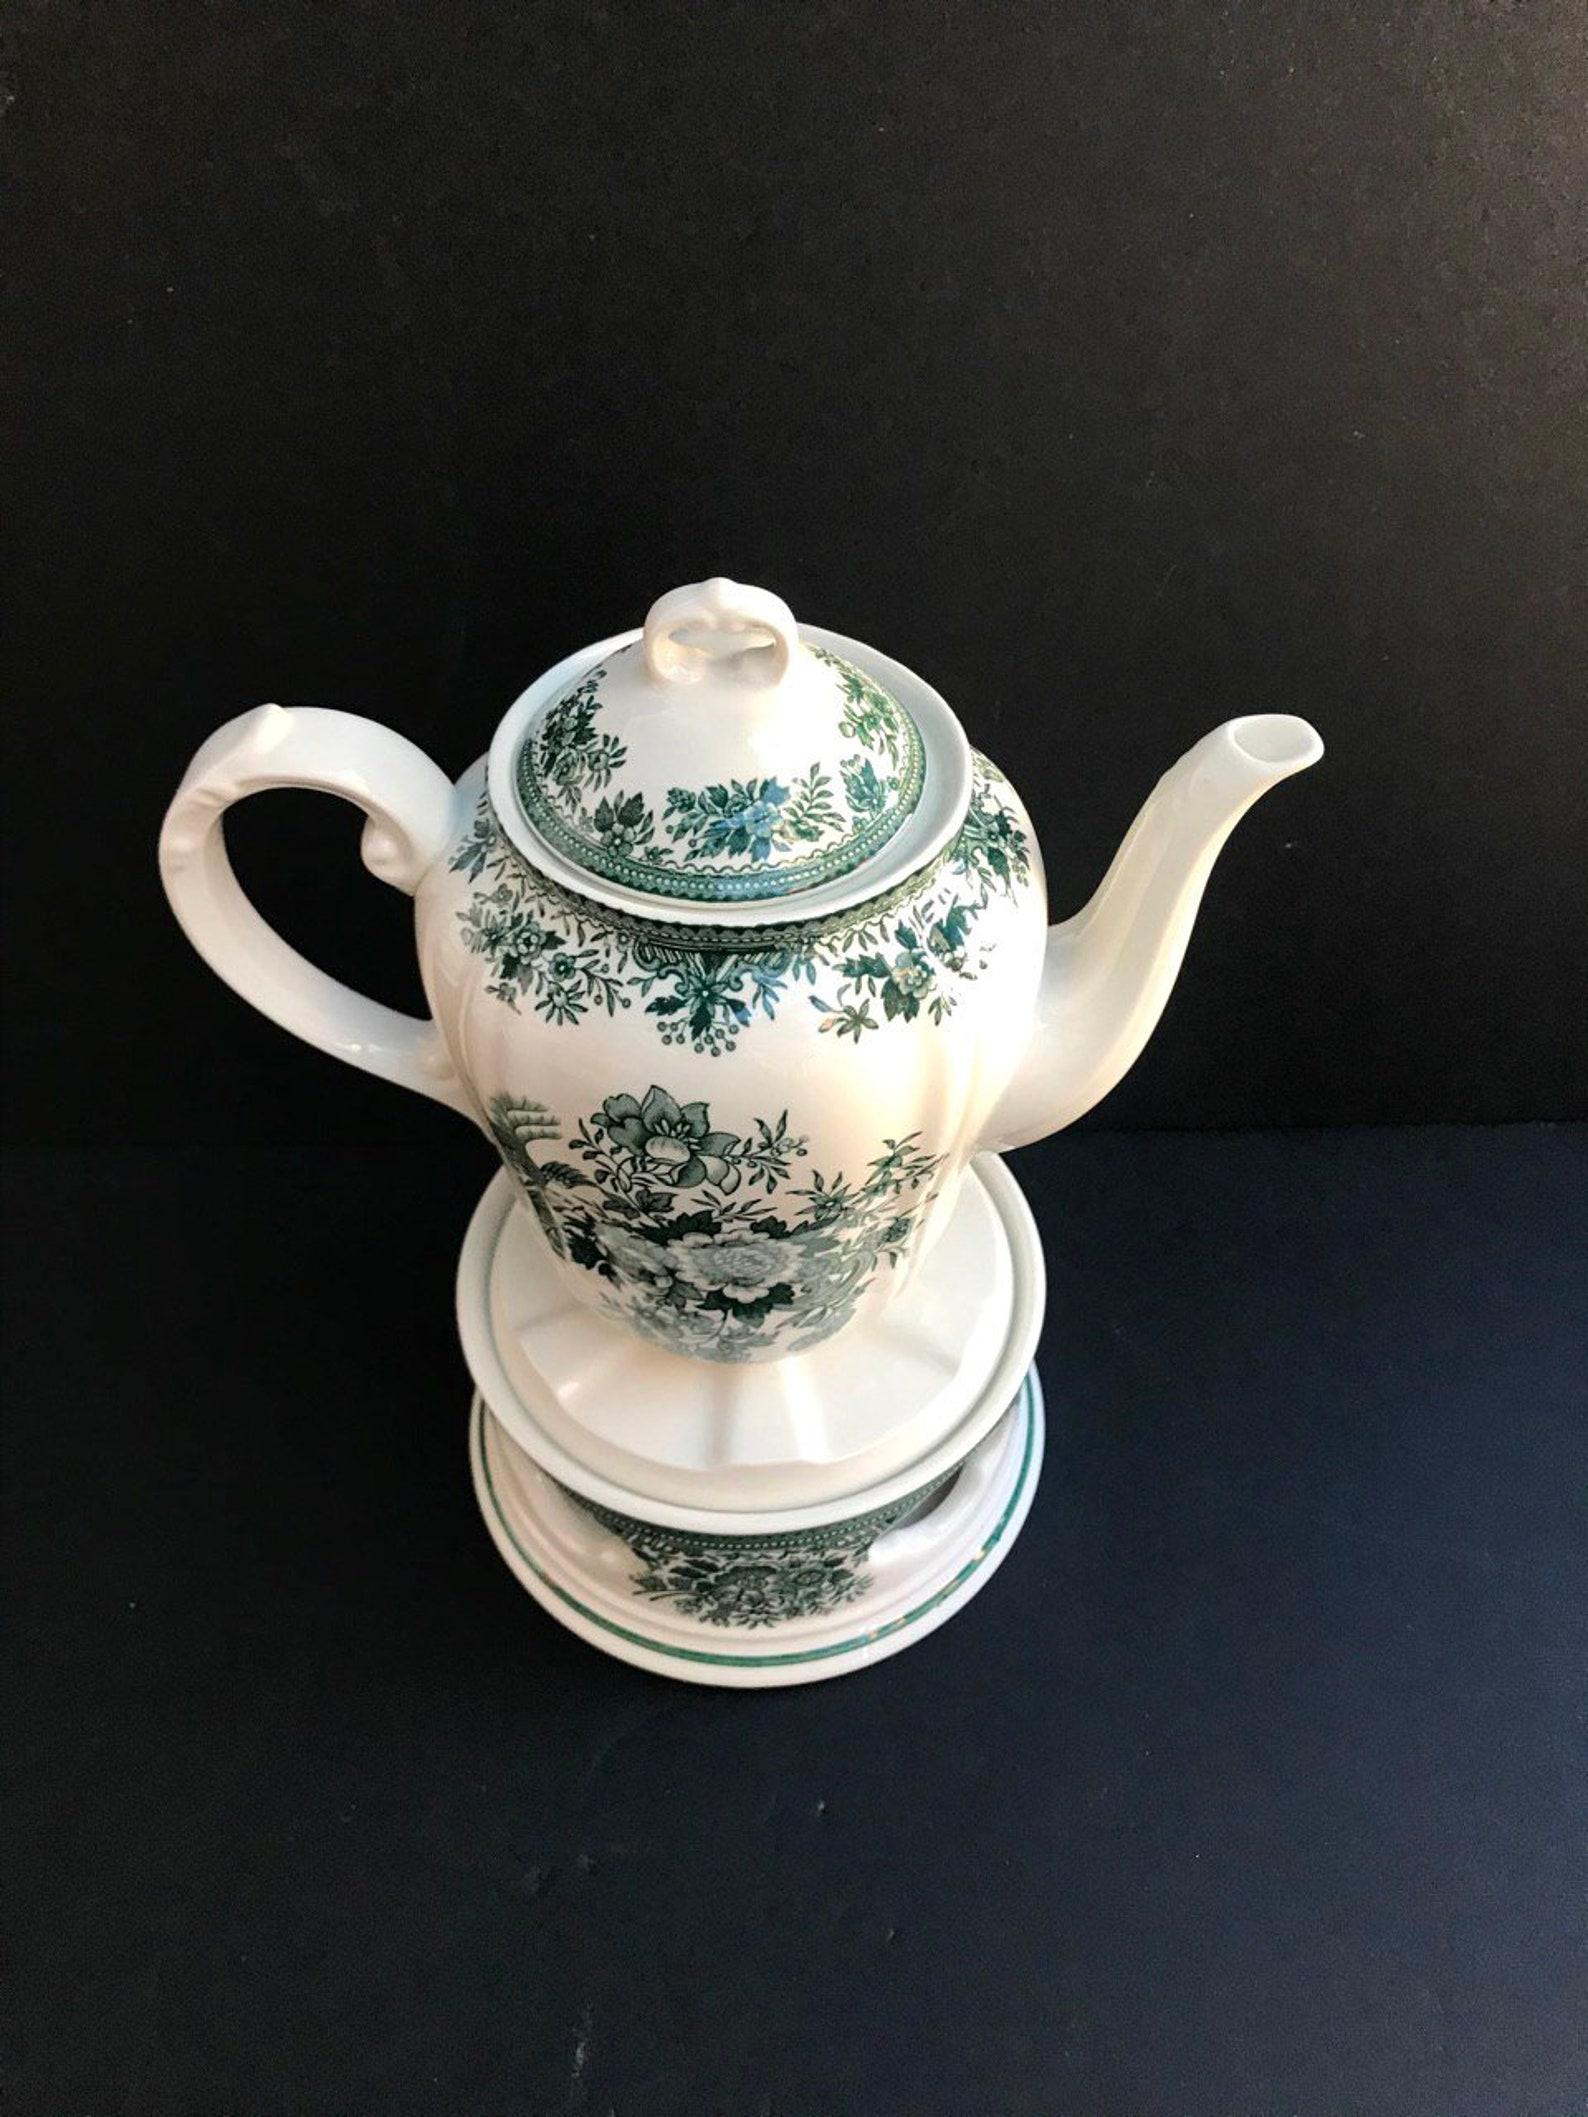 Villeroy & Boch Fasan.

Delightful Vintage Green and White Porcelain Teapot with Warmer Stand. Manufactured in West Germany by Villeroy & Boch. 

Pattern: Fasan (Pheasant)

Vitro porcelain. 

An interesting, worthy thing for serving a